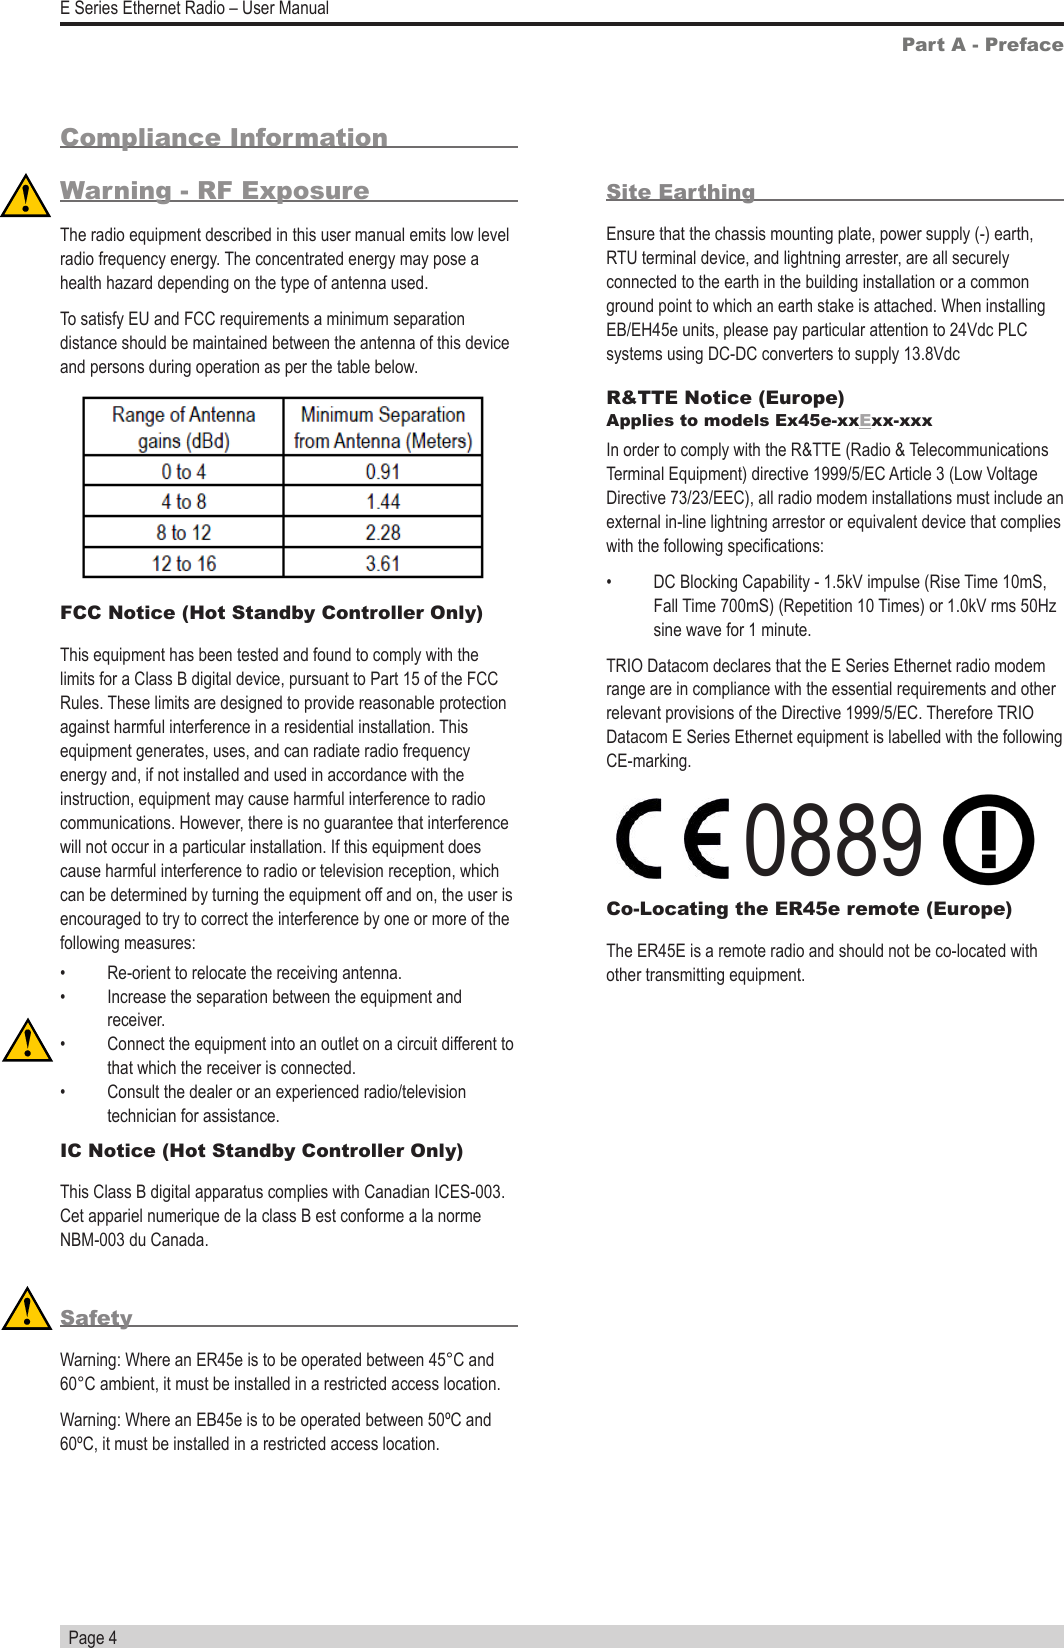   Page 4E Series Ethernet Radio – User ManualSite EarthingEnsure that the chassis mounting plate, power supply (-) earth, RTU terminal device, and lightning arrester, are all securely connected to the earth in the building installation or a common ground point to which an earth stake is attached. When installing EB/EH45e units, please pay particular attention to 24Vdc PLC systems using DC-DC converters to supply 13.8VdcR&amp;TTE Notice (Europe) Applies to models Ex45e-xxExx-xxxIn order to comply with the R&amp;TTE (Radio &amp; Telecommunications Terminal Equipment) directive 1999/5/EC Article 3 (Low Voltage Directive 73/23/EEC), all radio modem installations must include an external in-line lightning arrestor or equivalent device that complies with the following specications: •  DC Blocking Capability - 1.5kV impulse (Rise Time 10mS, Fall Time 700mS) (Repetition 10 Times) or 1.0kV rms 50Hz sine wave for 1 minute.TRIO Datacom declares that the E Series Ethernet radio modem range are in compliance with the essential requirements and other relevant provisions of the Directive 1999/5/EC. Therefore TRIO Datacom E Series Ethernet equipment is labelled with the following CE-marking.            0889 Co-Locating the ER45e remote (Europe)The ER45E is a remote radio and should not be co-located with other transmitting equipment.Part A - PrefaceCompliance Information Warning - RF ExposureThe radio equipment described in this user manual emits low level radio frequency energy. The concentrated energy may pose a health hazard depending on the type of antenna used. To satisfy EU and FCC requirements a minimum separation distance should be maintained between the antenna of this device and persons during operation as per the table below.FCC Notice (Hot Standby Controller Only)This equipment has been tested and found to comply with the limits for a Class B digital device, pursuant to Part 15 of the FCC Rules. These limits are designed to provide reasonable protection against harmful interference in a residential installation. This equipment generates, uses, and can radiate radio frequency energy and, if not installed and used in accordance with the instruction, equipment may cause harmful interference to radio communications. However, there is no guarantee that interference will not occur in a particular installation. If this equipment does cause harmful interference to radio or television reception, which can be determined by turning the equipment off and on, the user is encouraged to try to correct the interference by one or more of the following measures:•  Re-orient to relocate the receiving antenna.•  Increase the separation between the equipment and receiver.•  Connect the equipment into an outlet on a circuit different to that which the receiver is connected.•  Consult the dealer or an experienced radio/television technician for assistance.IC Notice (Hot Standby Controller Only)This Class B digital apparatus complies with Canadian ICES-003. Cet appariel numerique de la class B est conforme a la norme NBM-003 du Canada.SafetyWarning: Where an ER45e is to be operated between 45°C and 60°C ambient, it must be installed in a restricted access location.Warning: Where an EB45e is to be operated between 50ºC and 60ºC, it must be installed in a restricted access location.